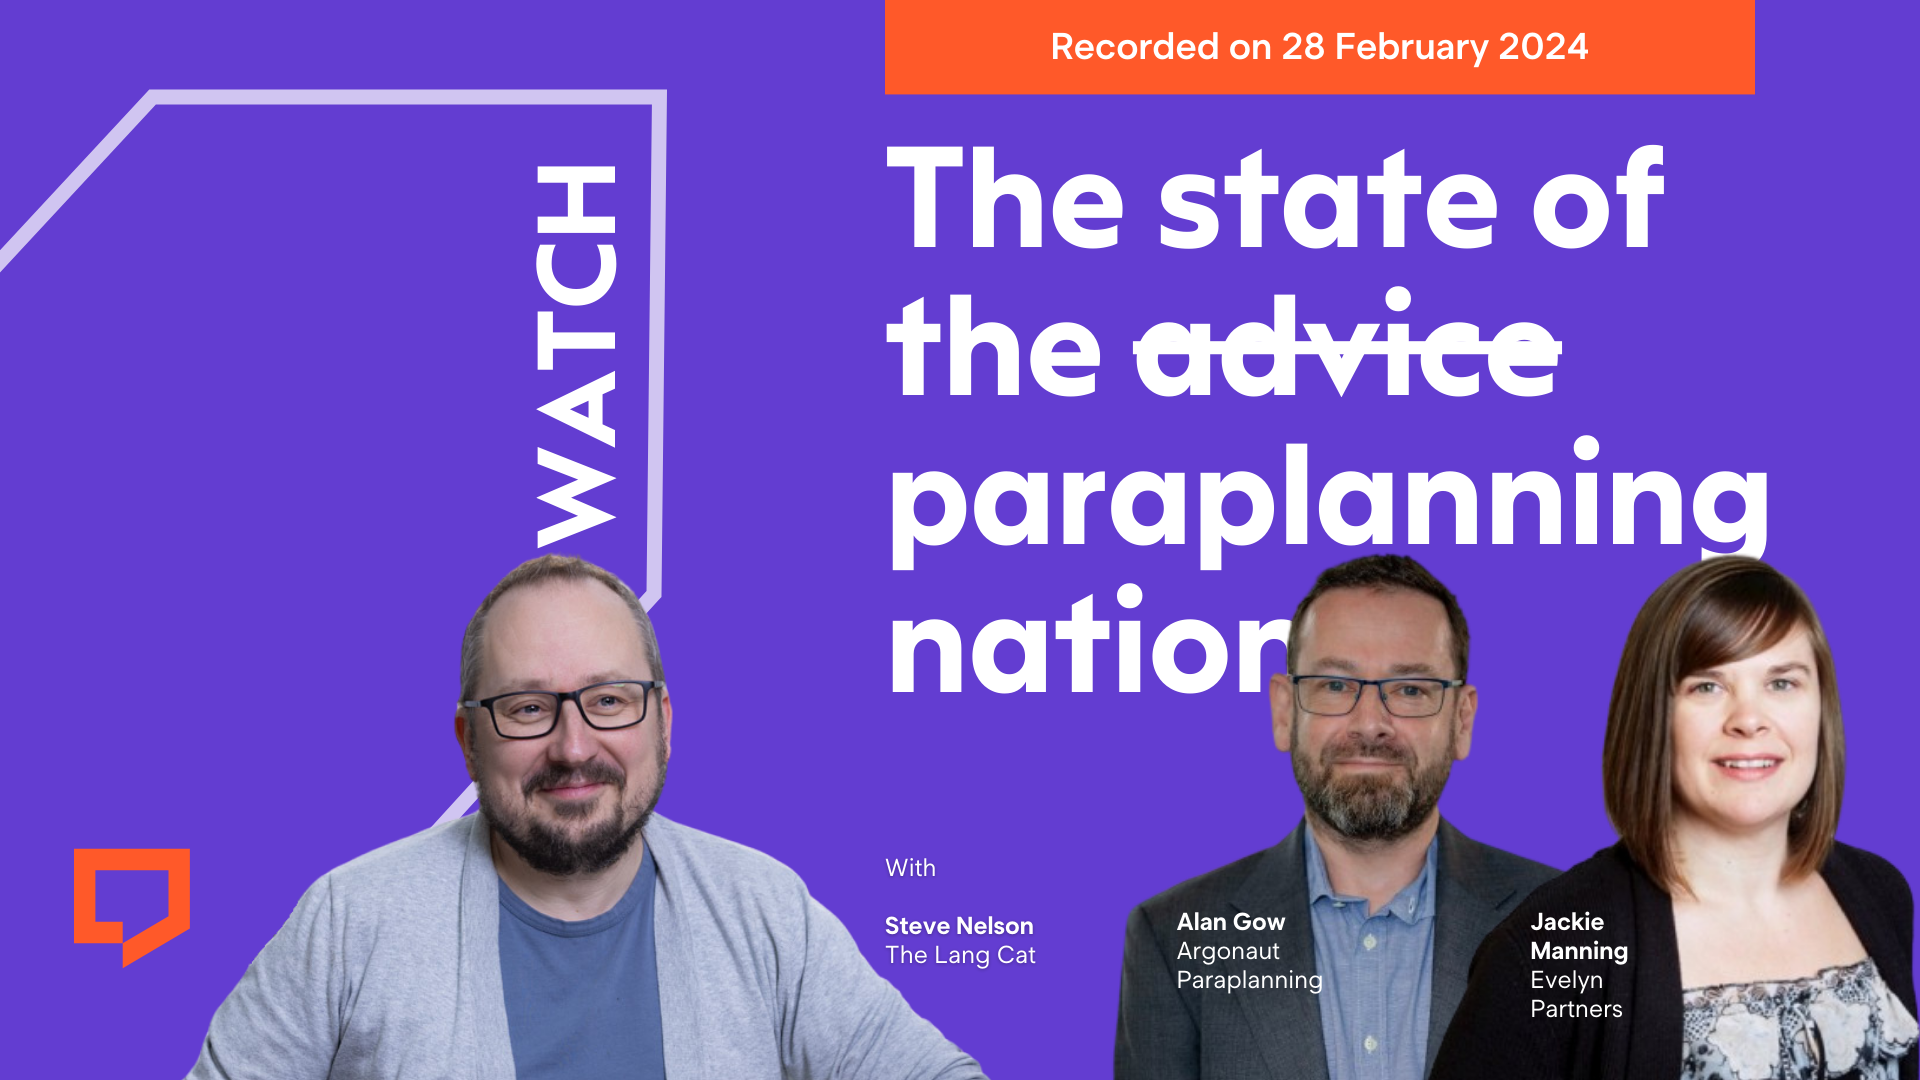 Recorded on 28 February 2024. The state of the paraplanning nation featuring Steve Nelson from The Lang Cat, Alan Gow from Argonaut Paraplanning and Jackie Manning from Evelyn Partners